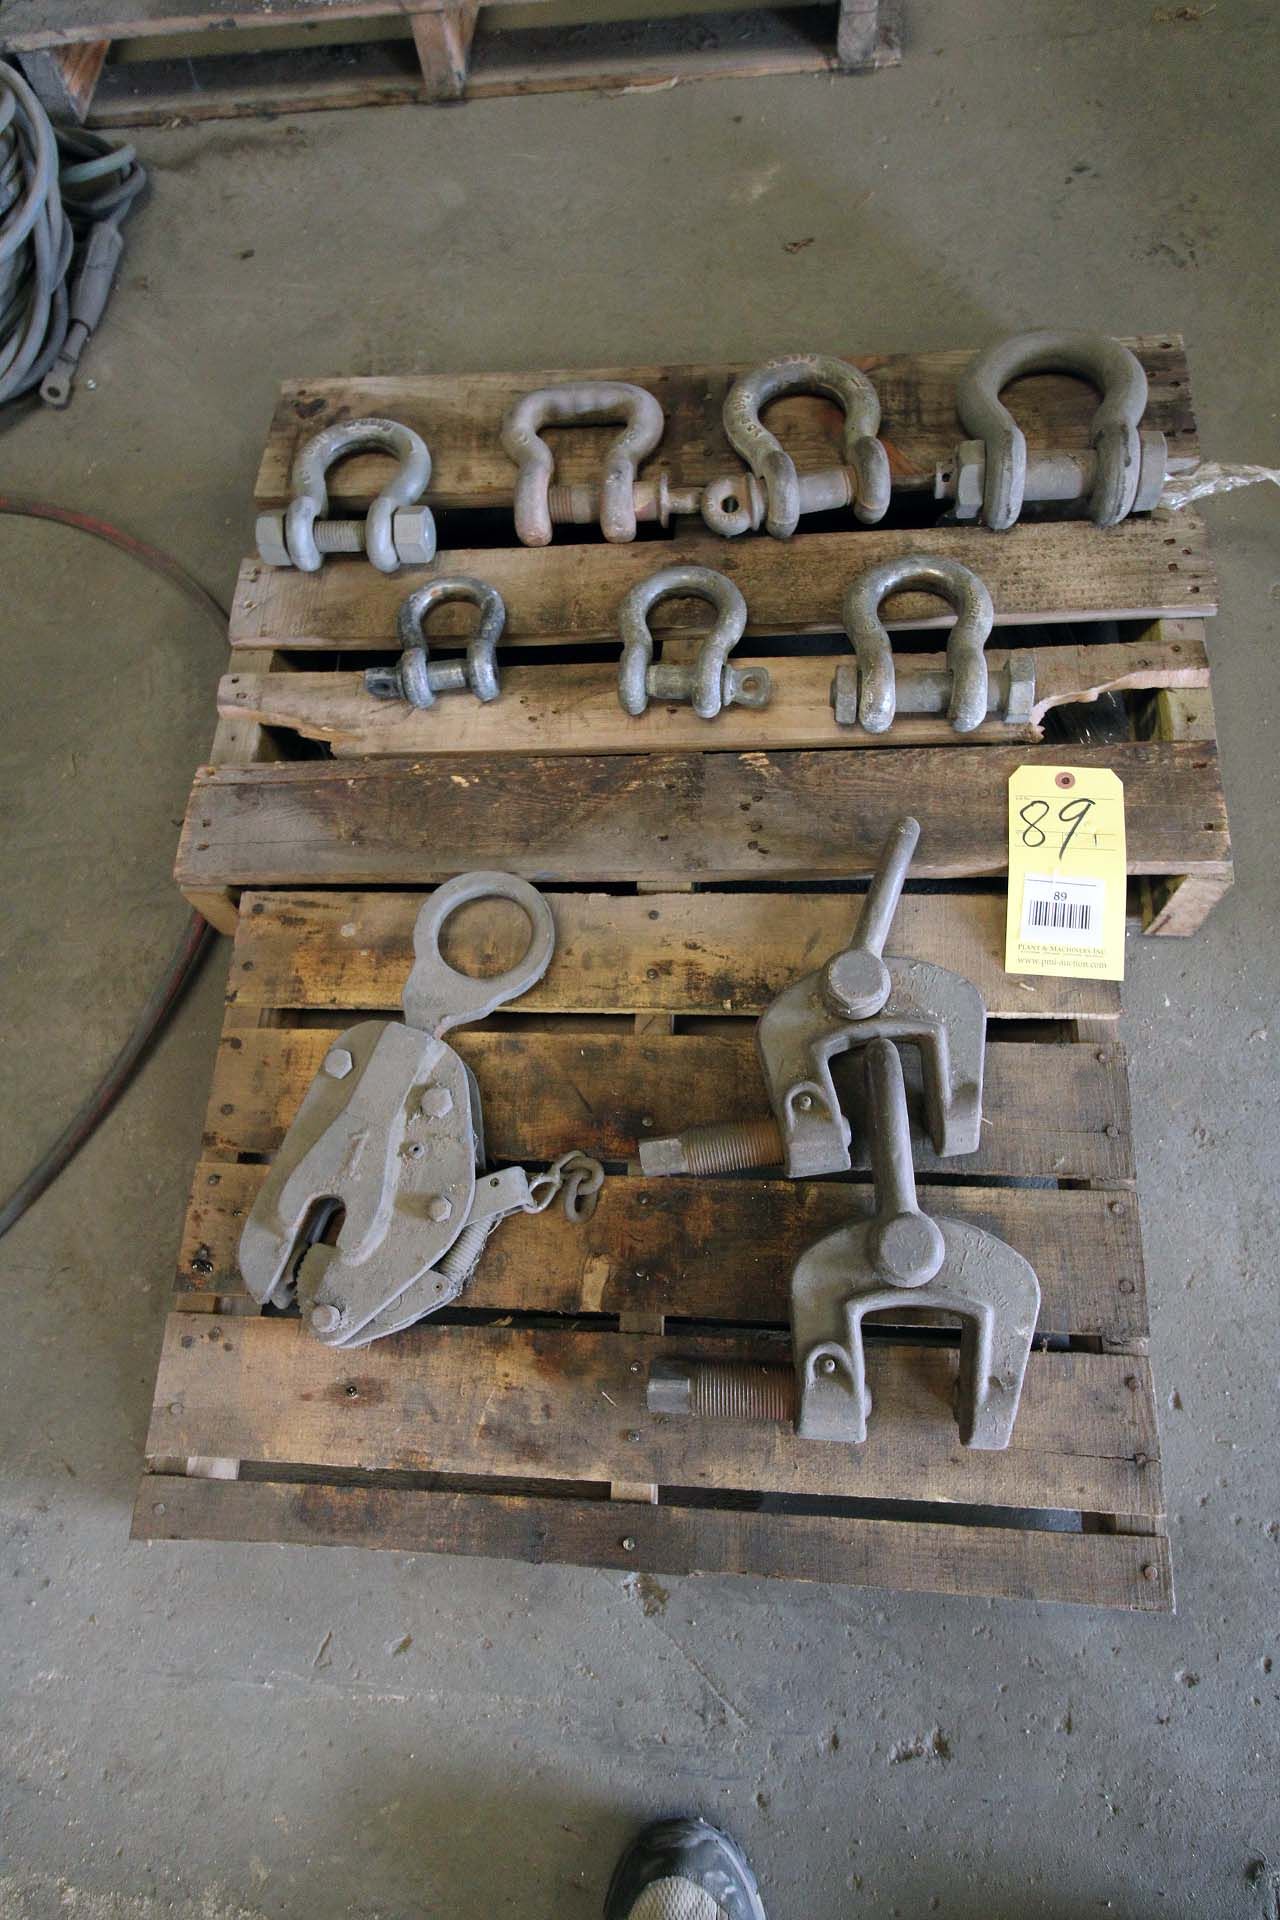 LOT CONSISTING OF: shackles & plate clamps (on two pallets)